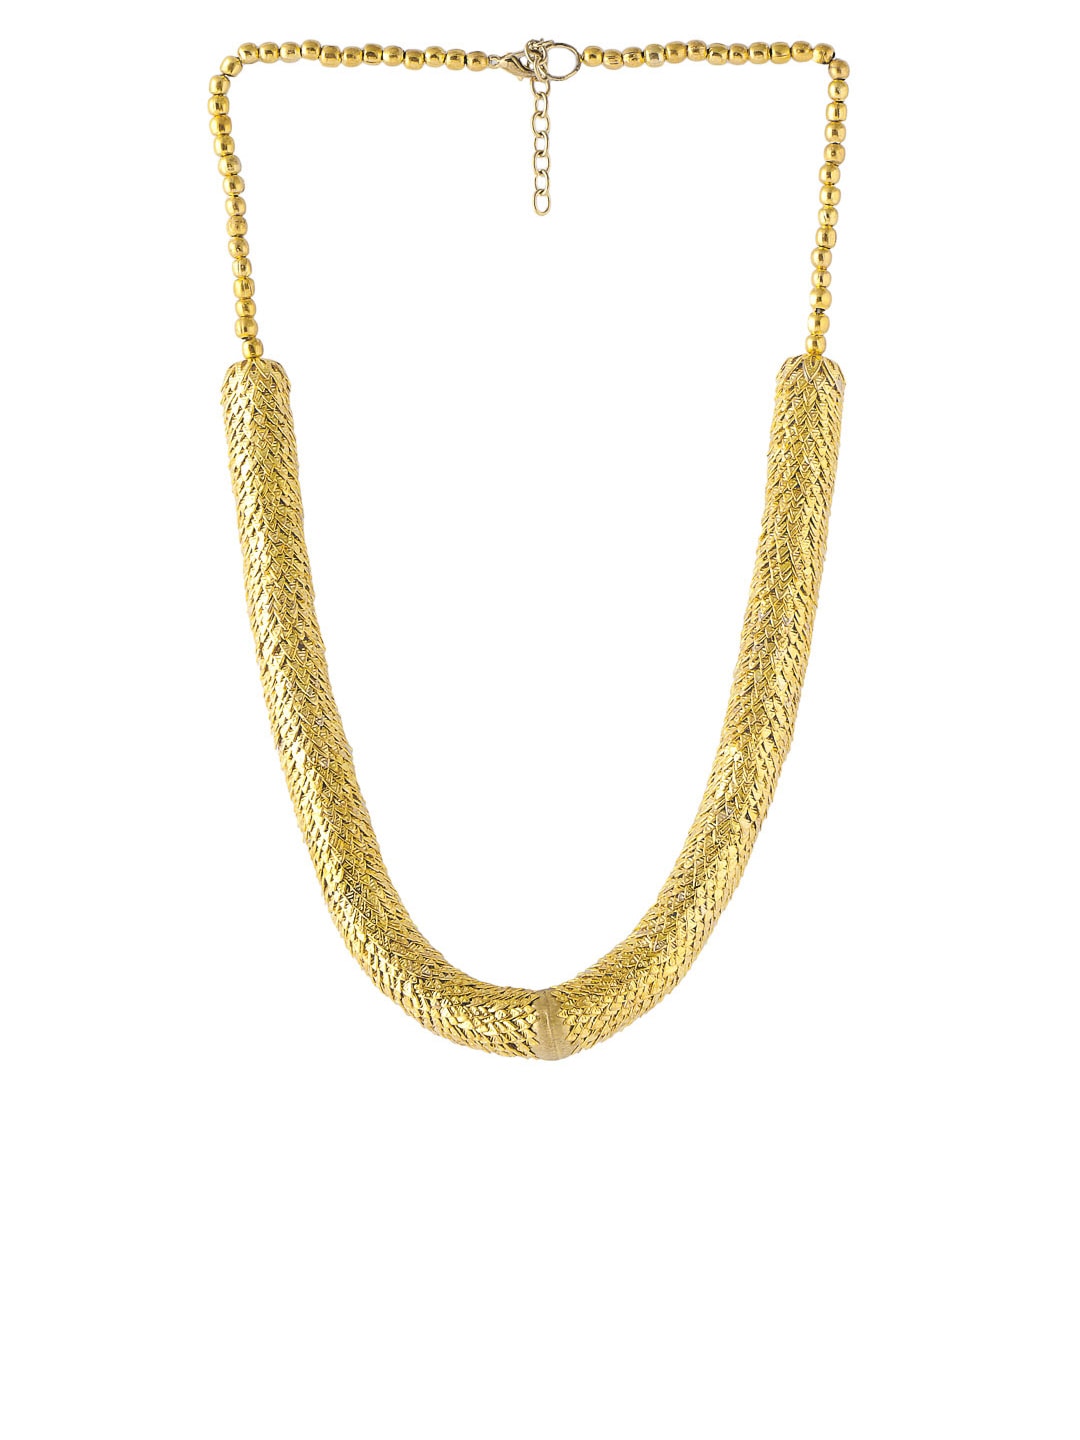 Pitaraa Golden Fish Scale Necklace